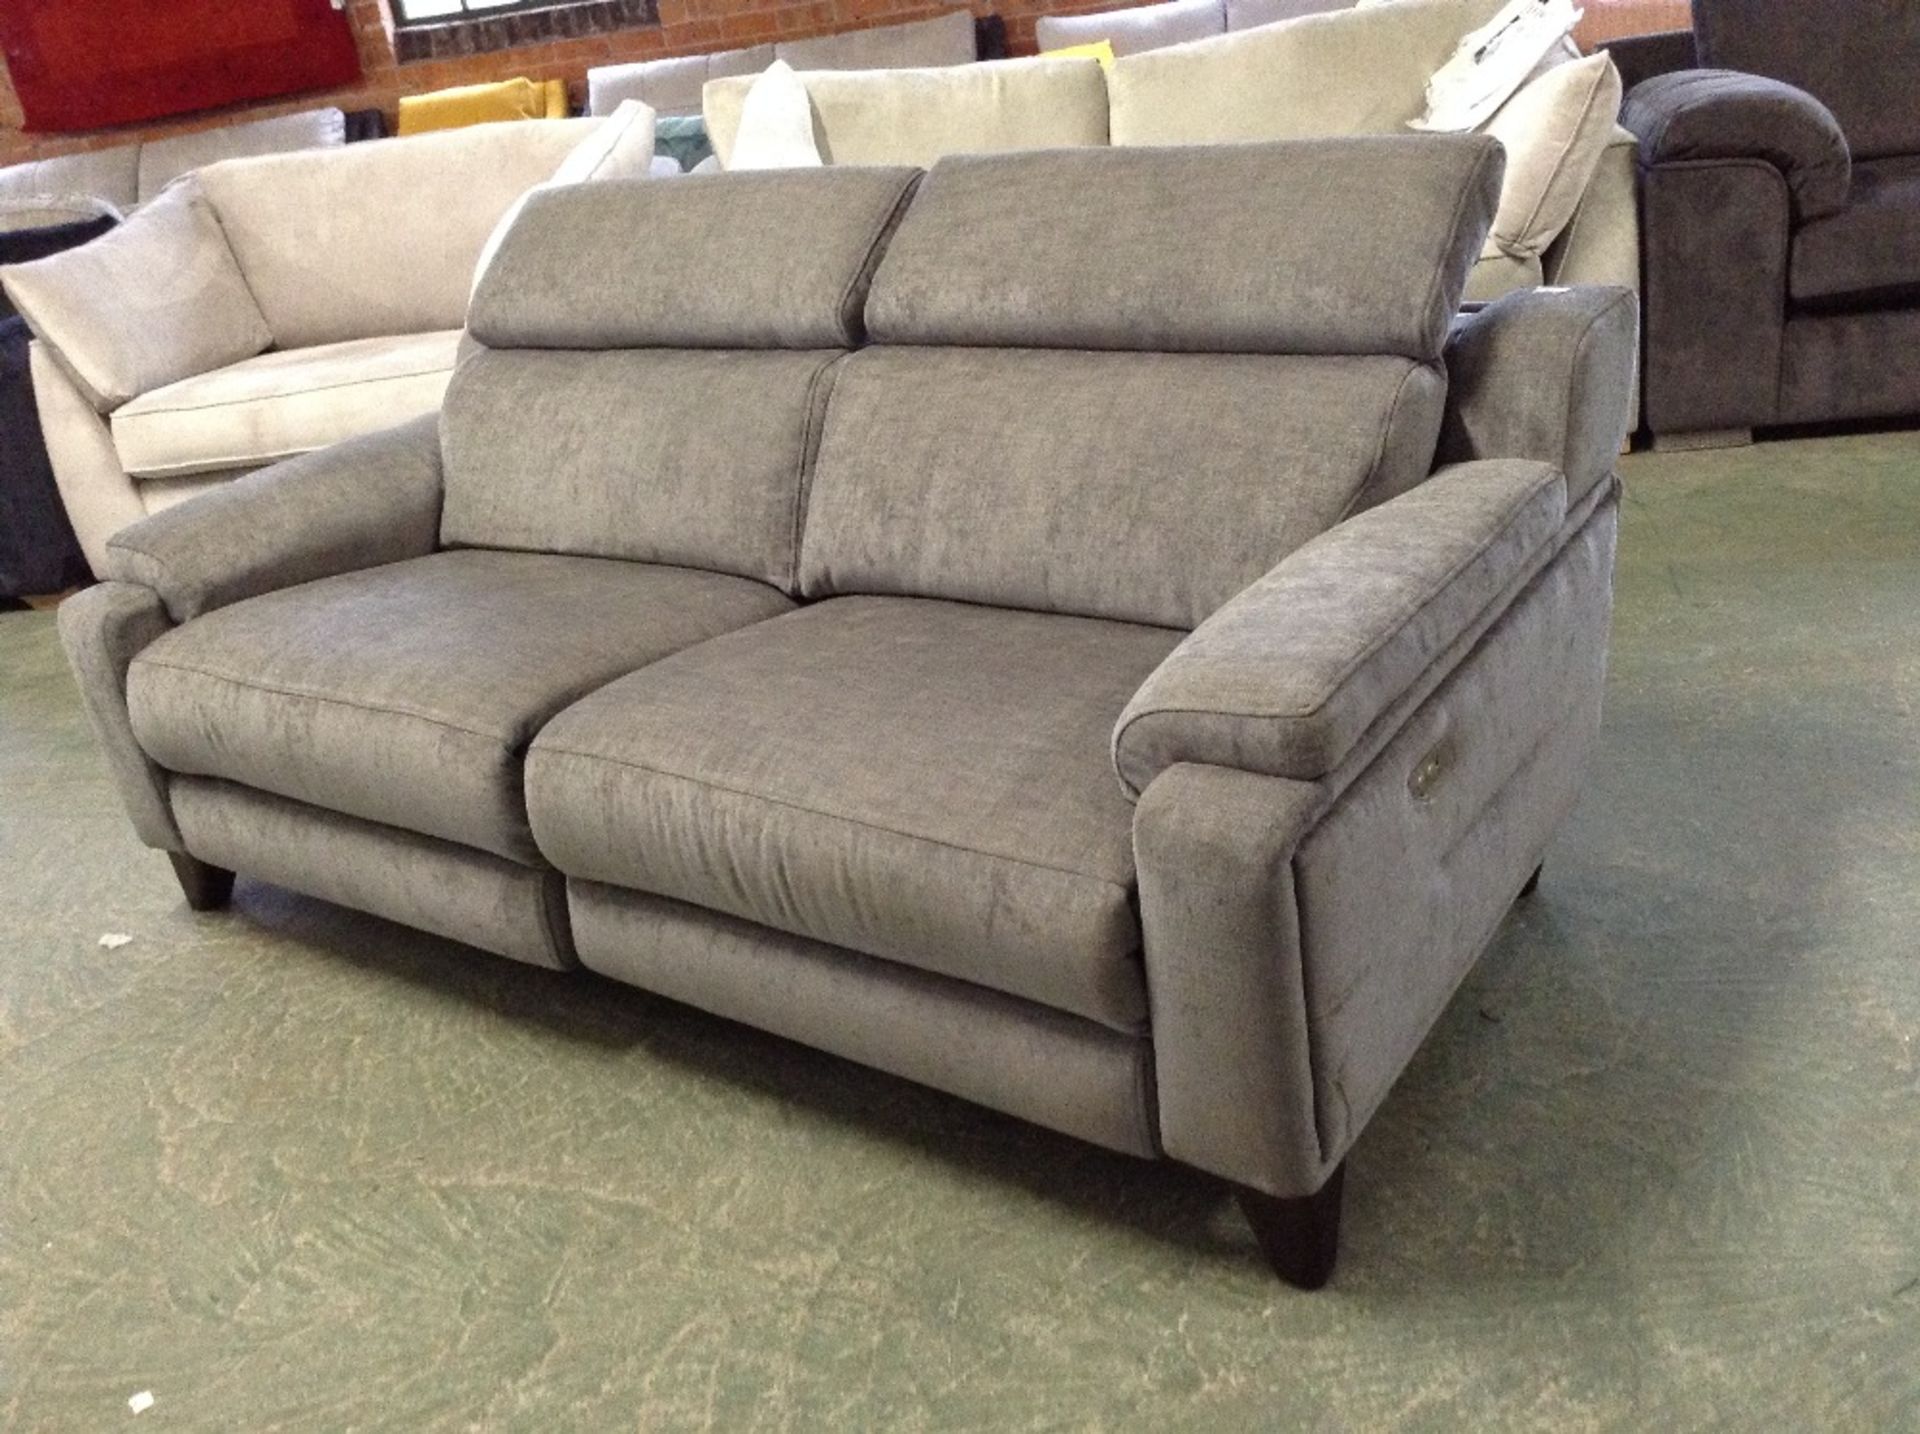 GREY FABRIC ELECTRIC RECLINING 3 SEATER SOFA WITH